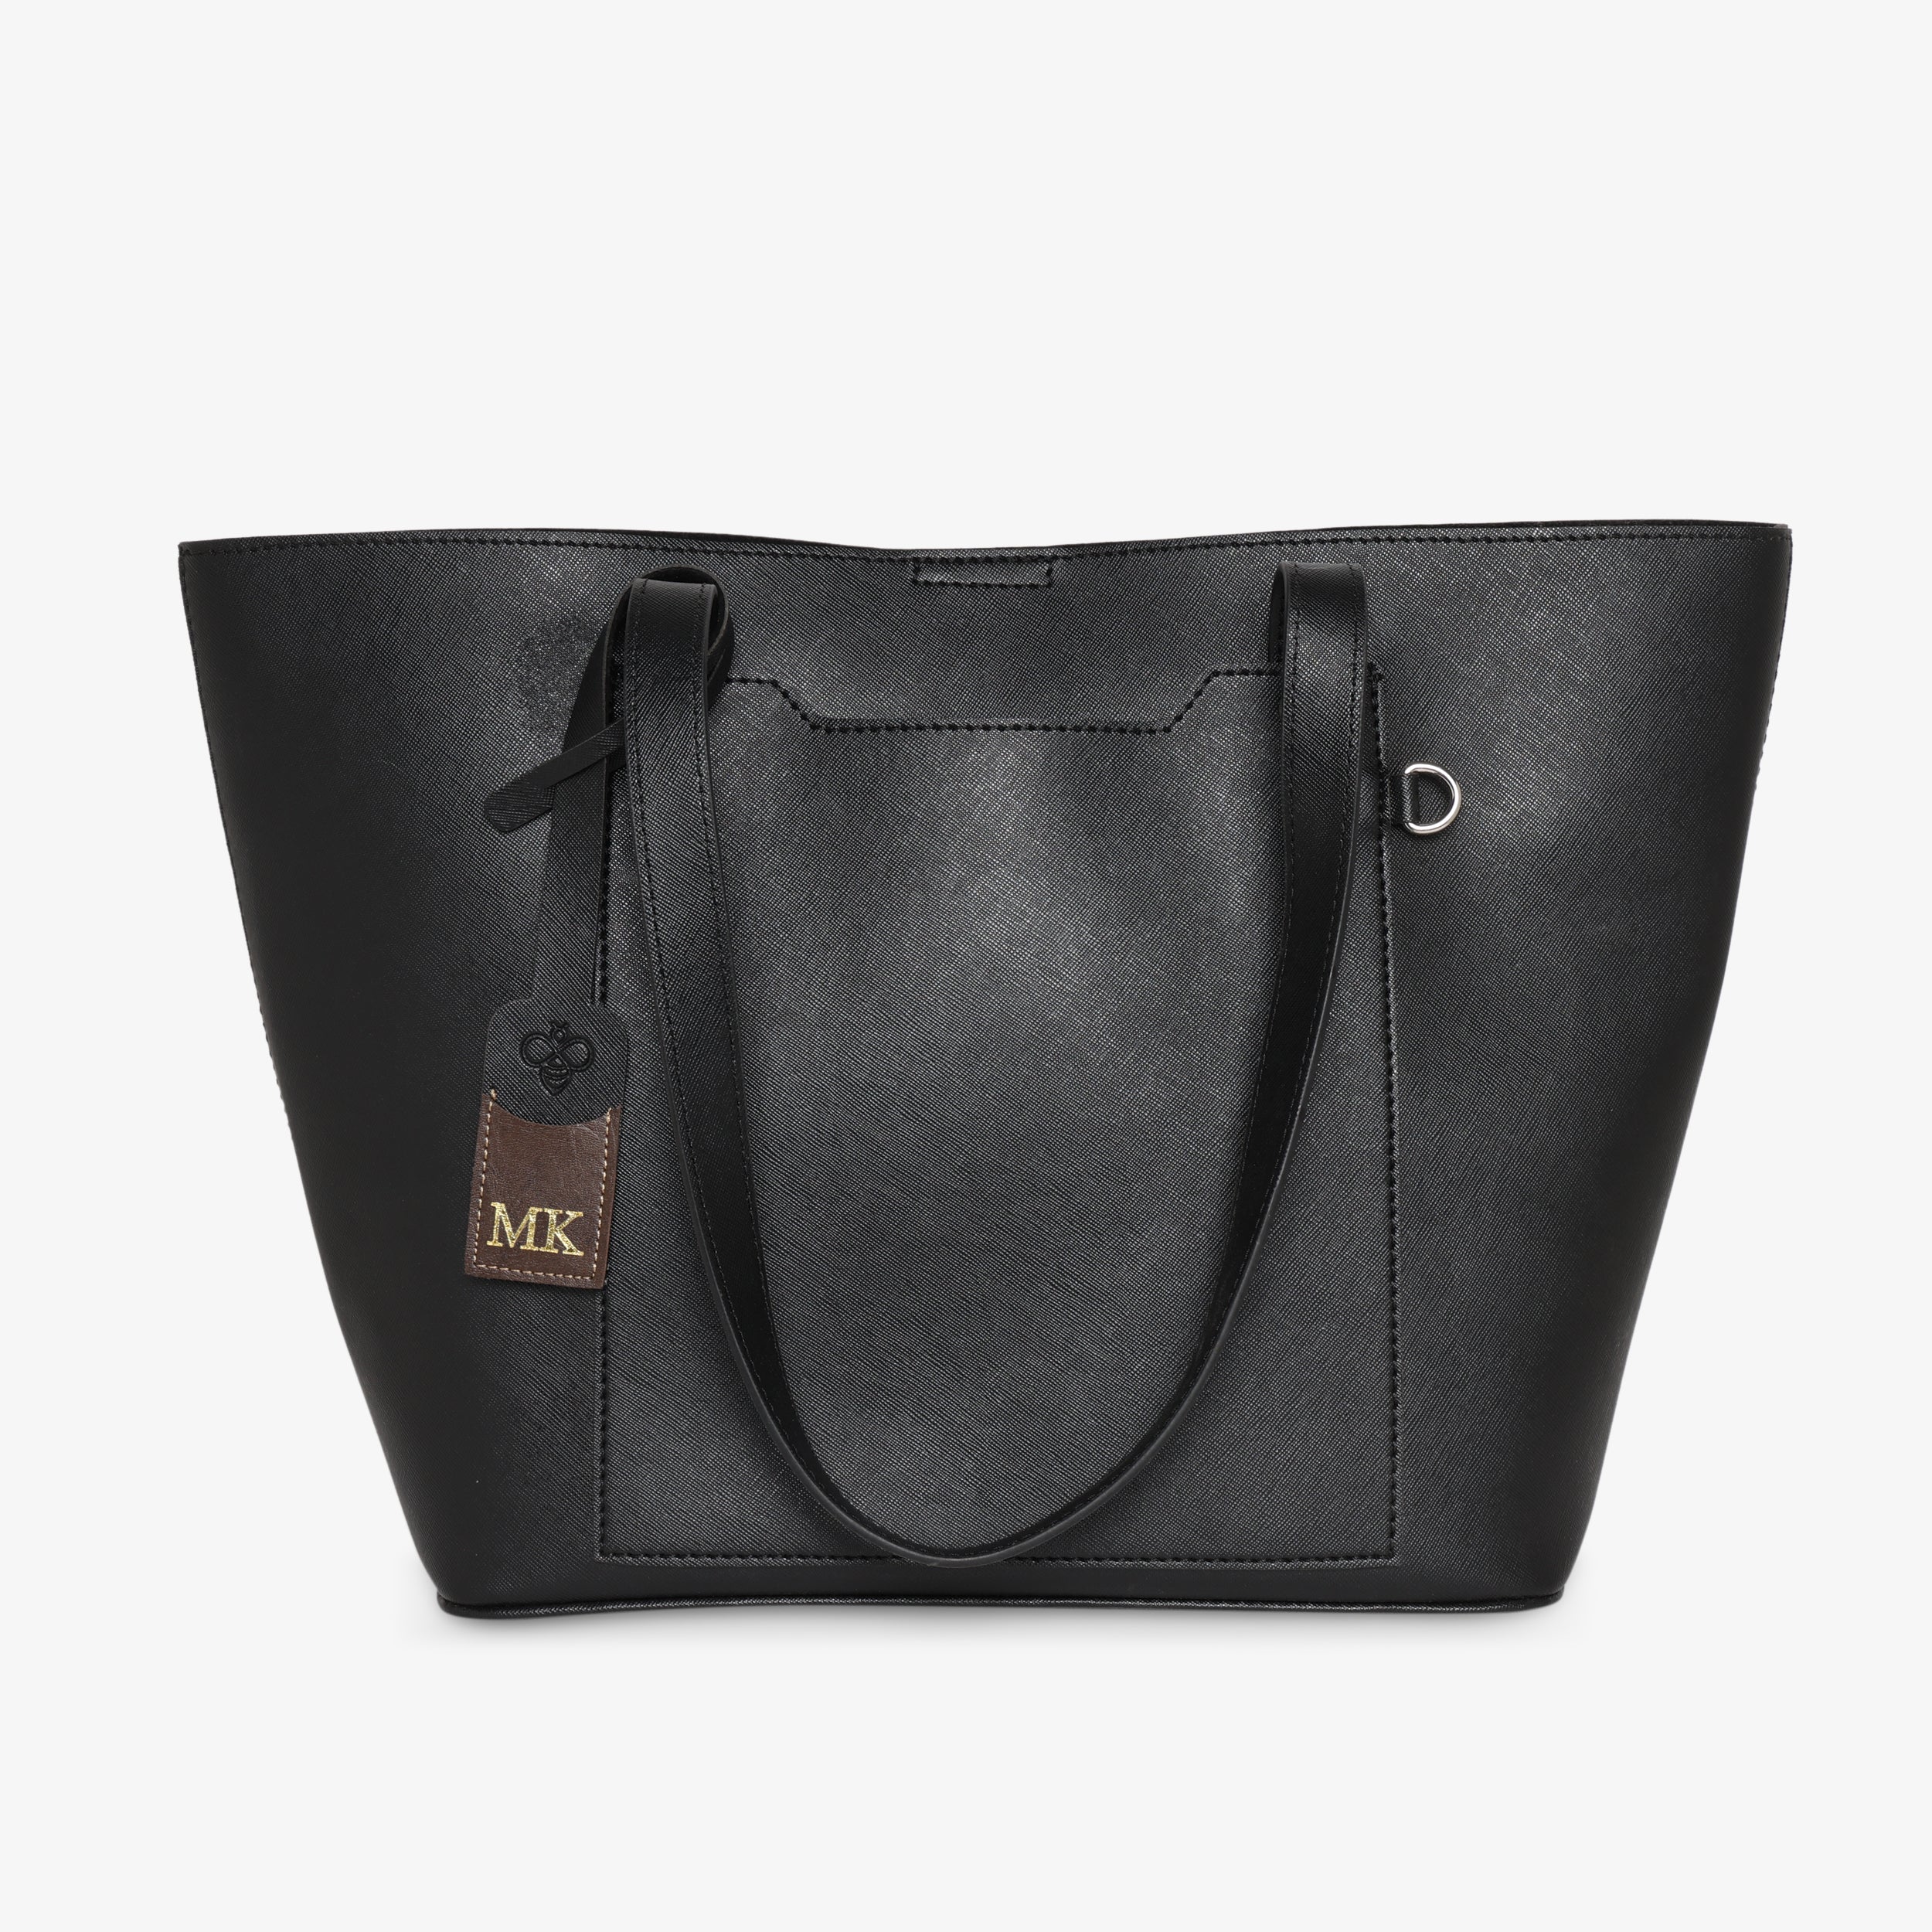 Personalised Tote Bags For Women In Black Colour At Best Rates Online